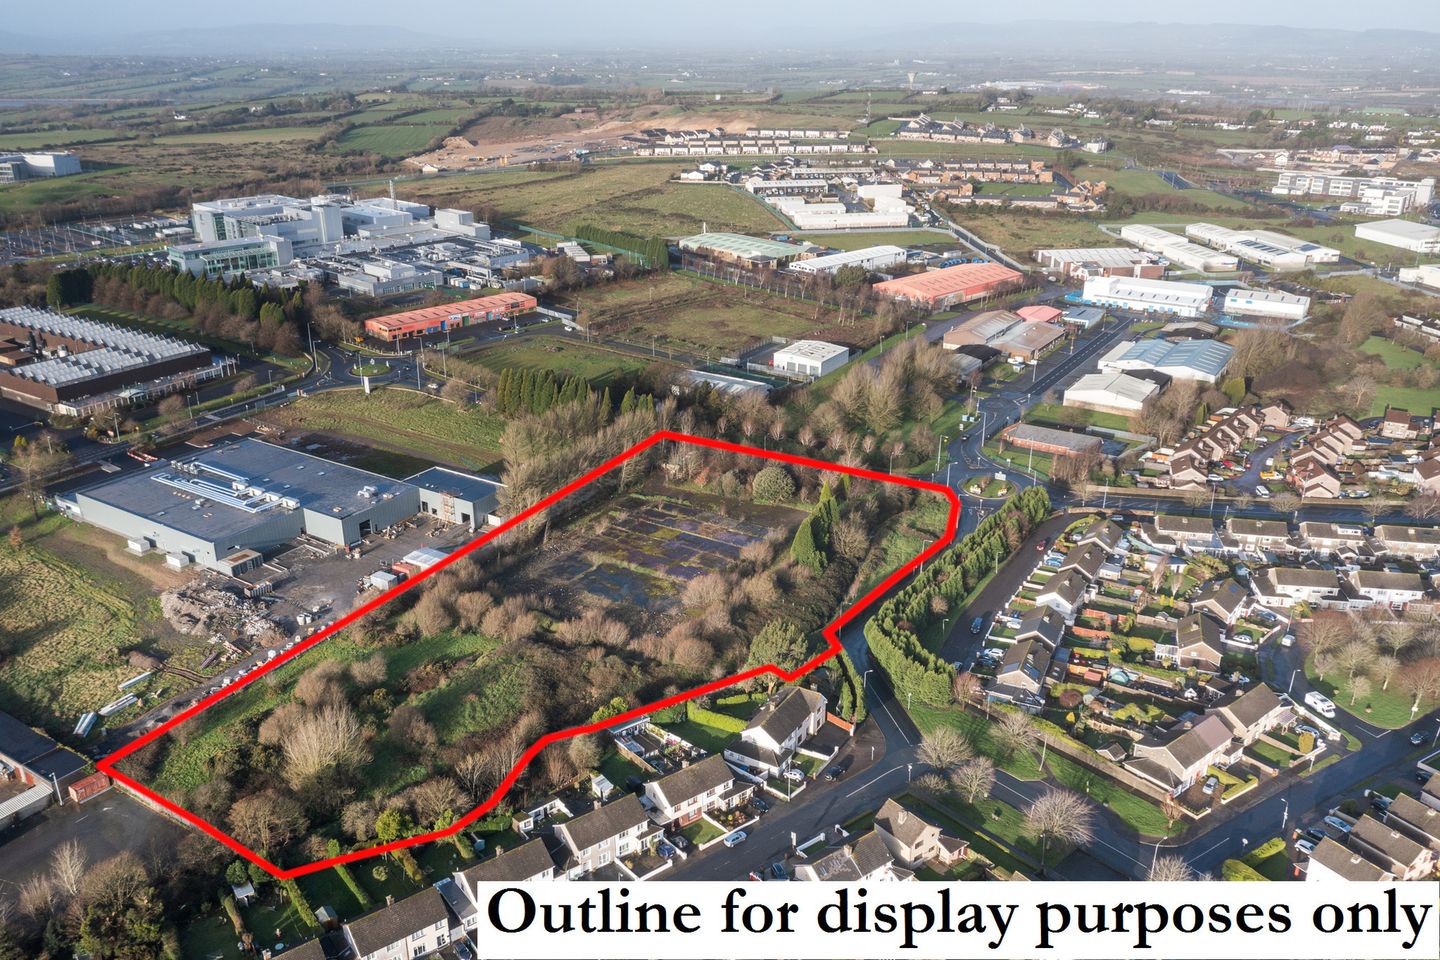 C. 5 Acre Site, Old Molloy Factory, Cleaboy Road, Waterford